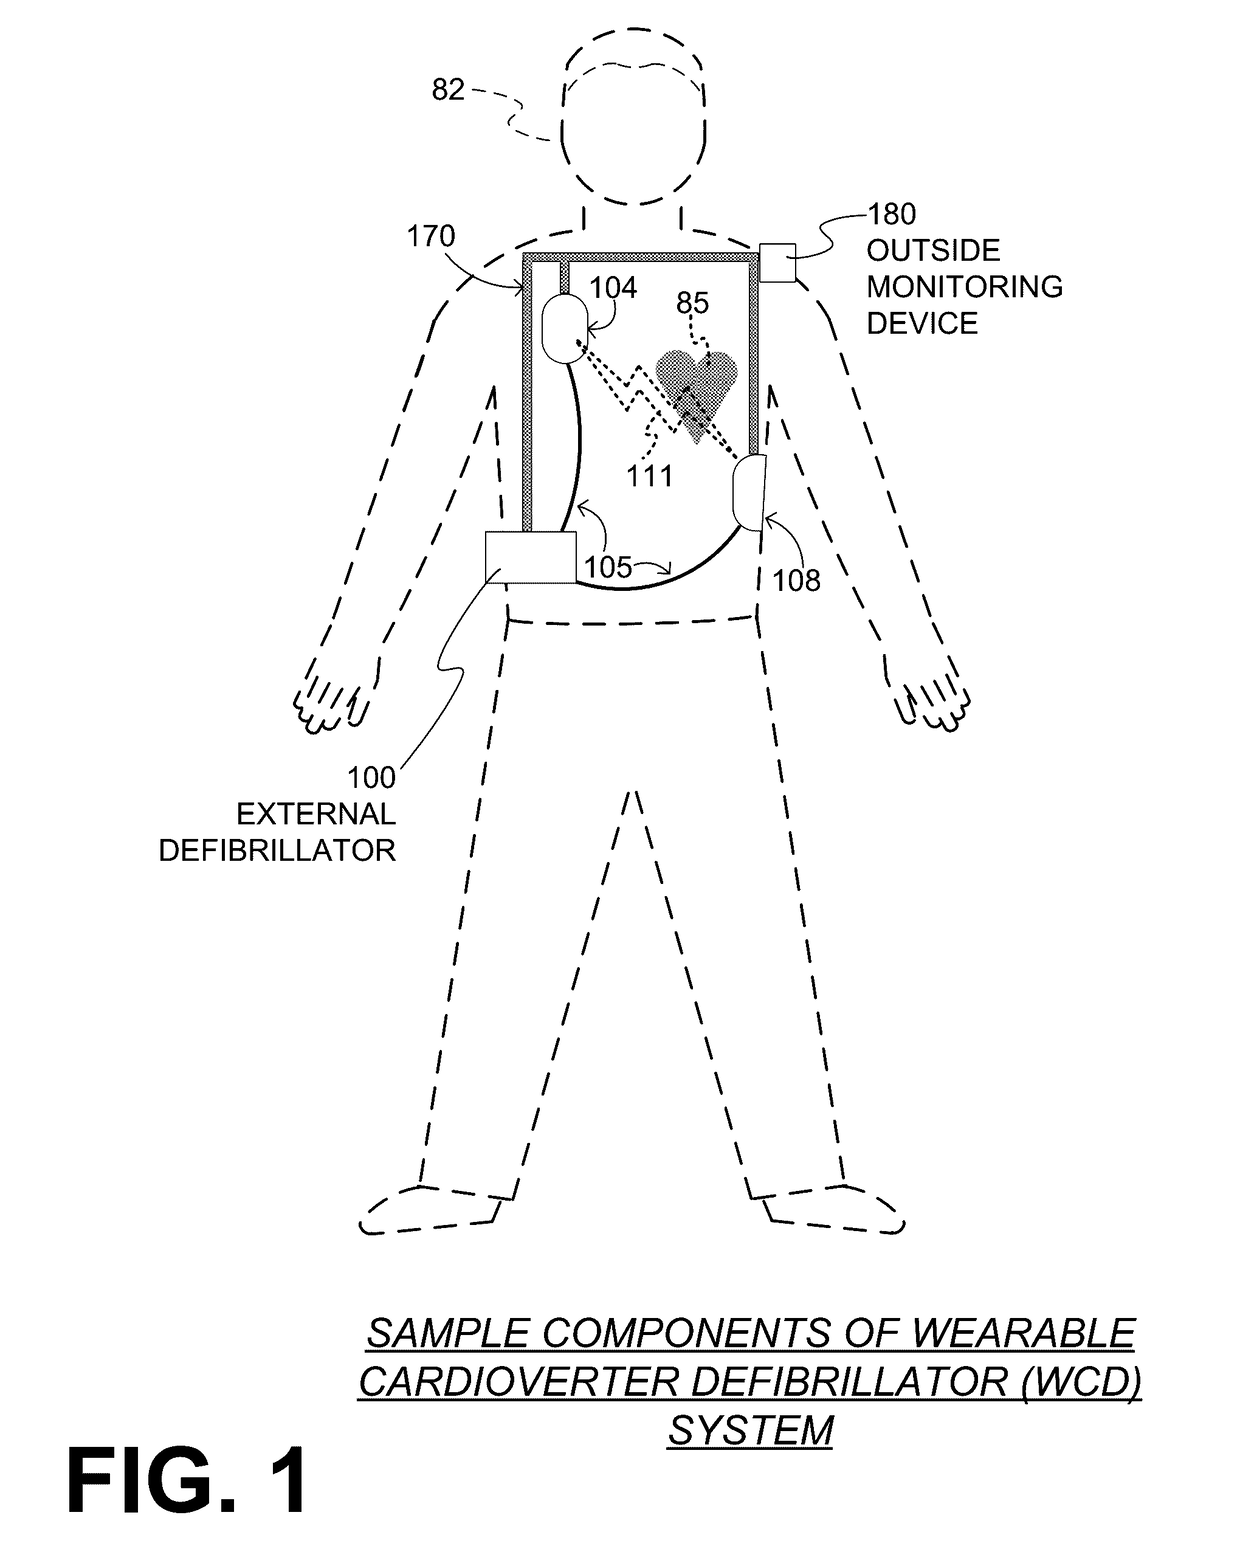 Wearable cardioverter defibrillator (WCD) system making shock/no shock determinations from multiple patient parameters